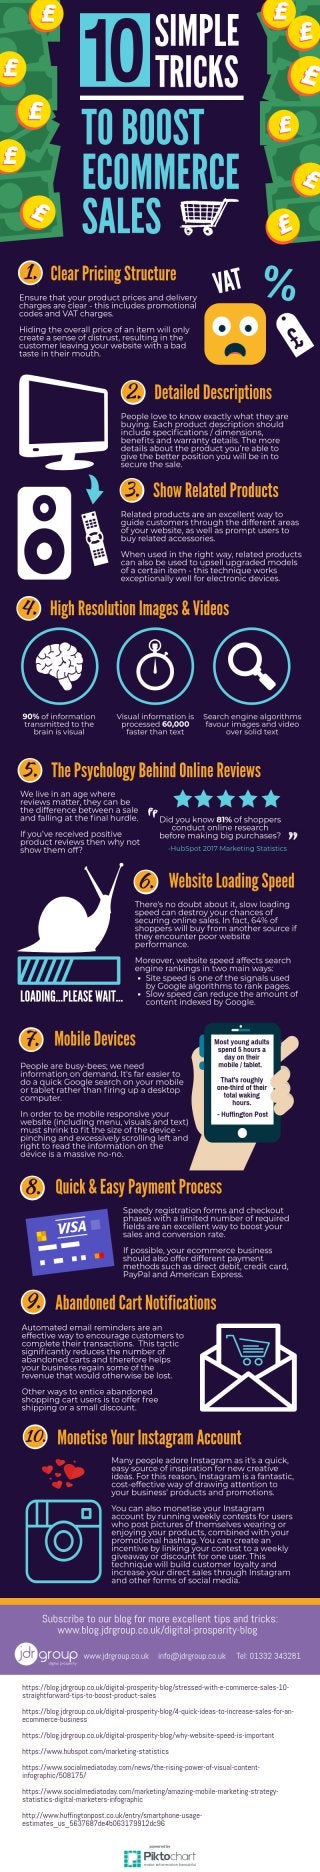 How To Boost Ecommerce Sales - 10 Tricks - Infographic